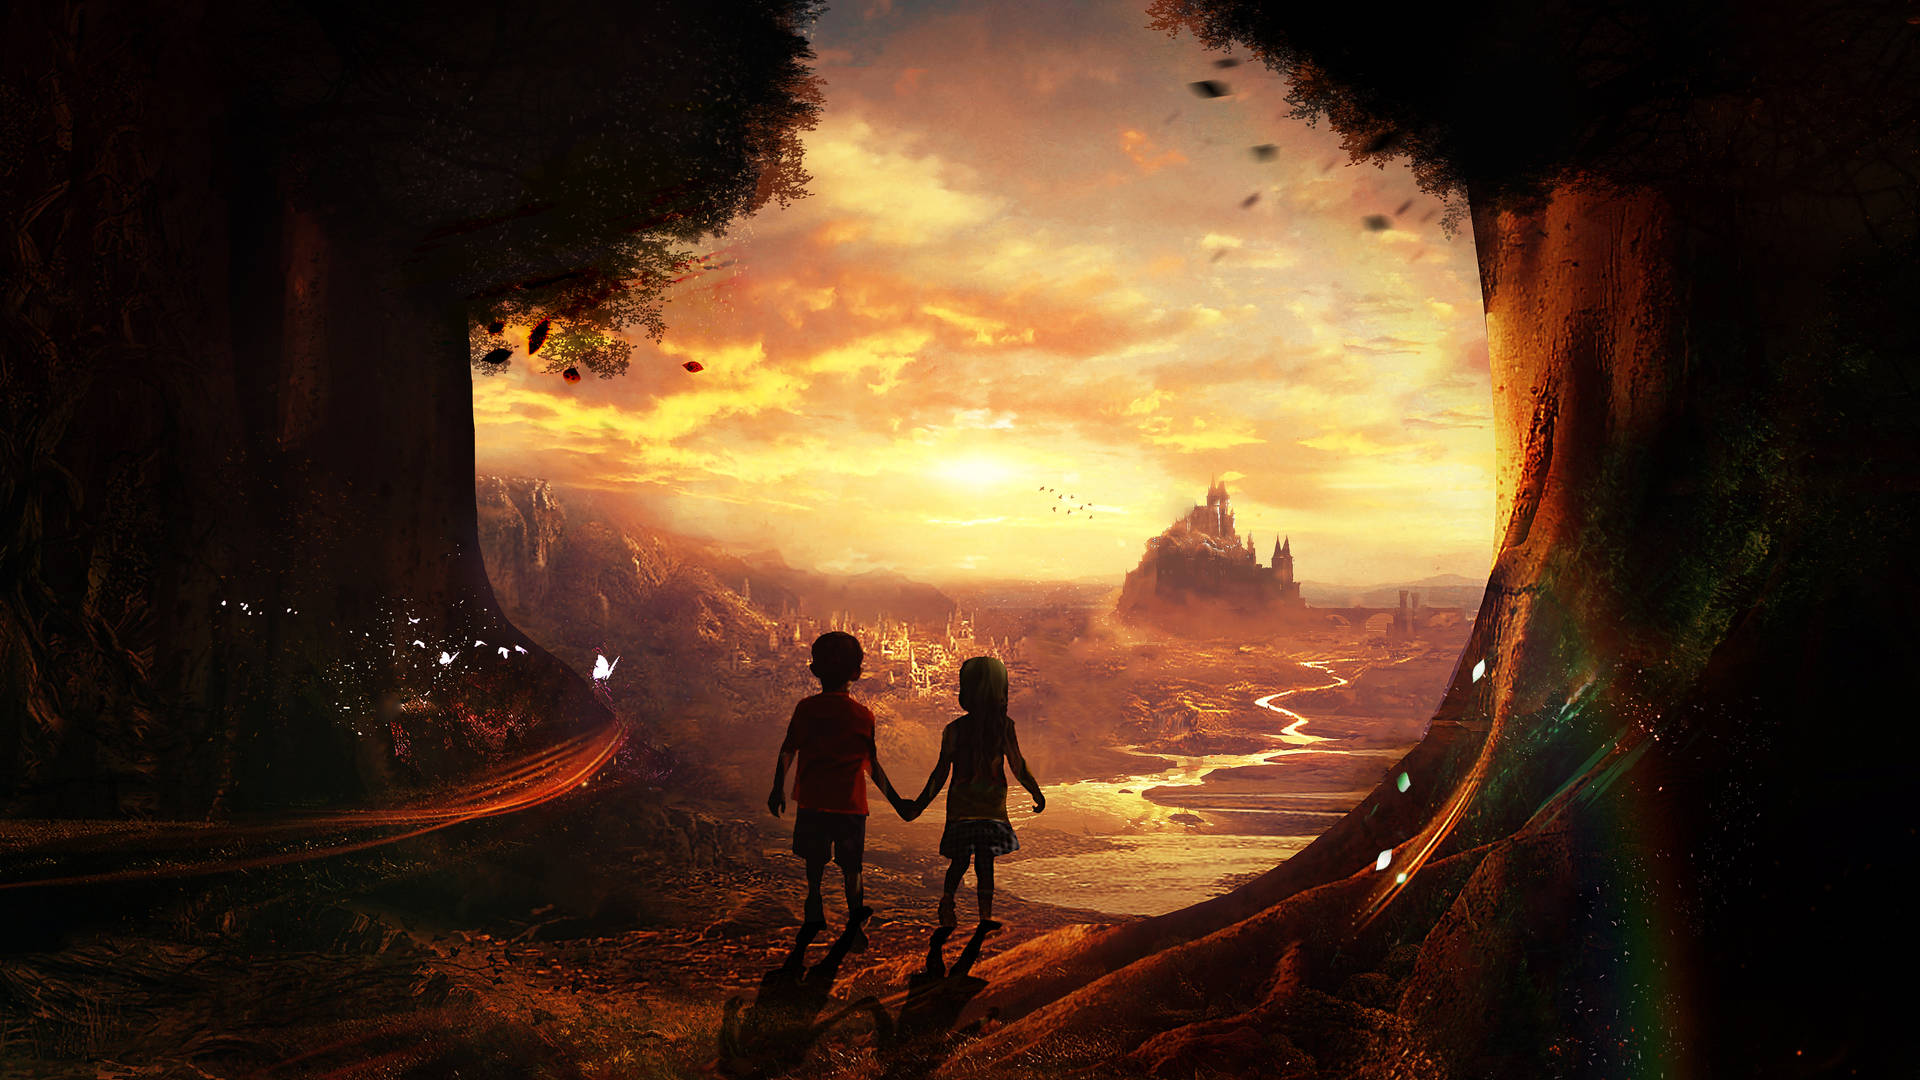 Fantasy art forest kids and mountain castles wallpaper.